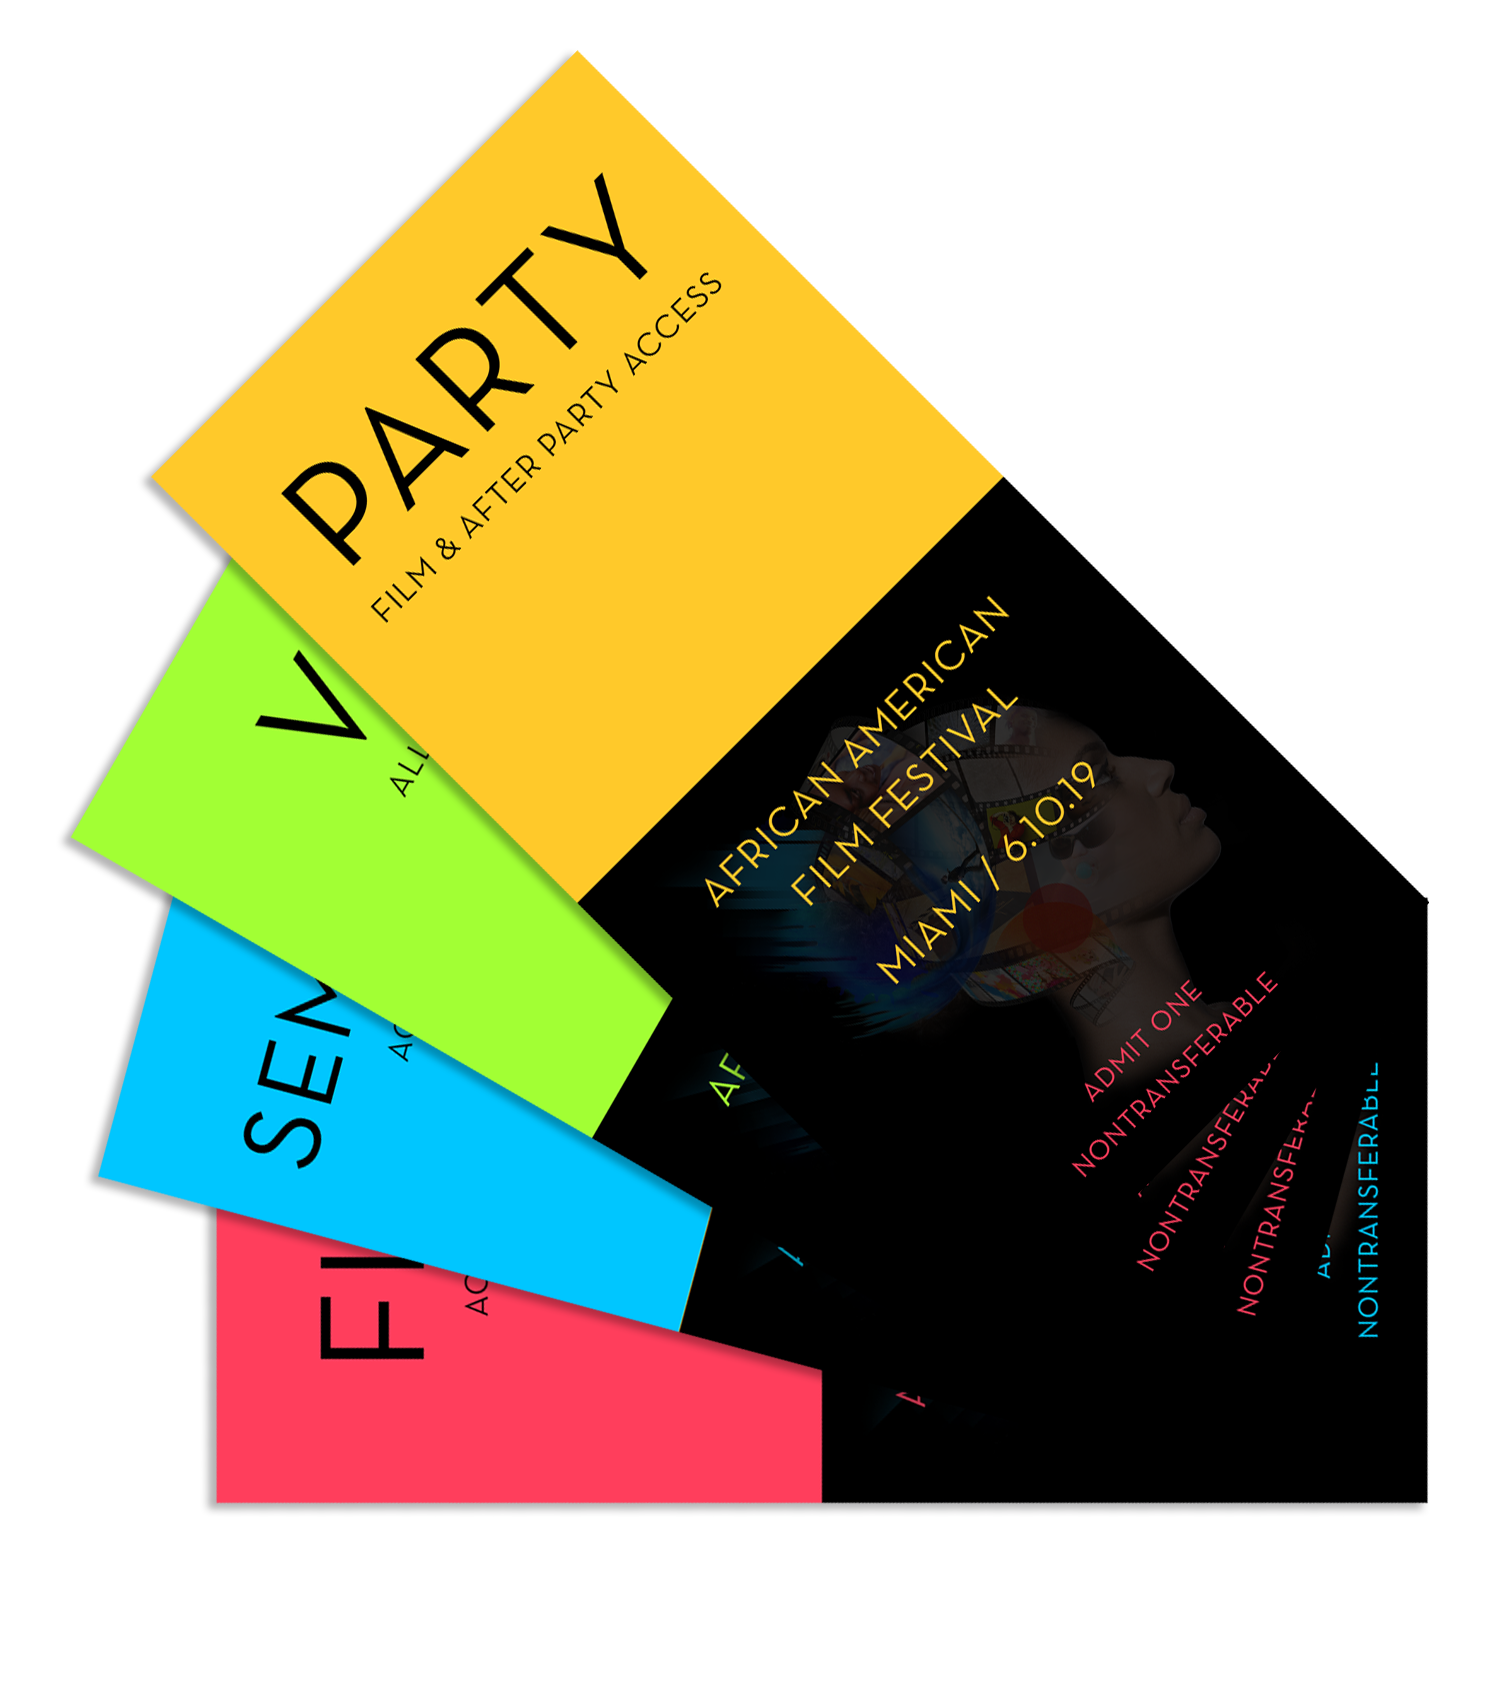 Festival Tickets for various events